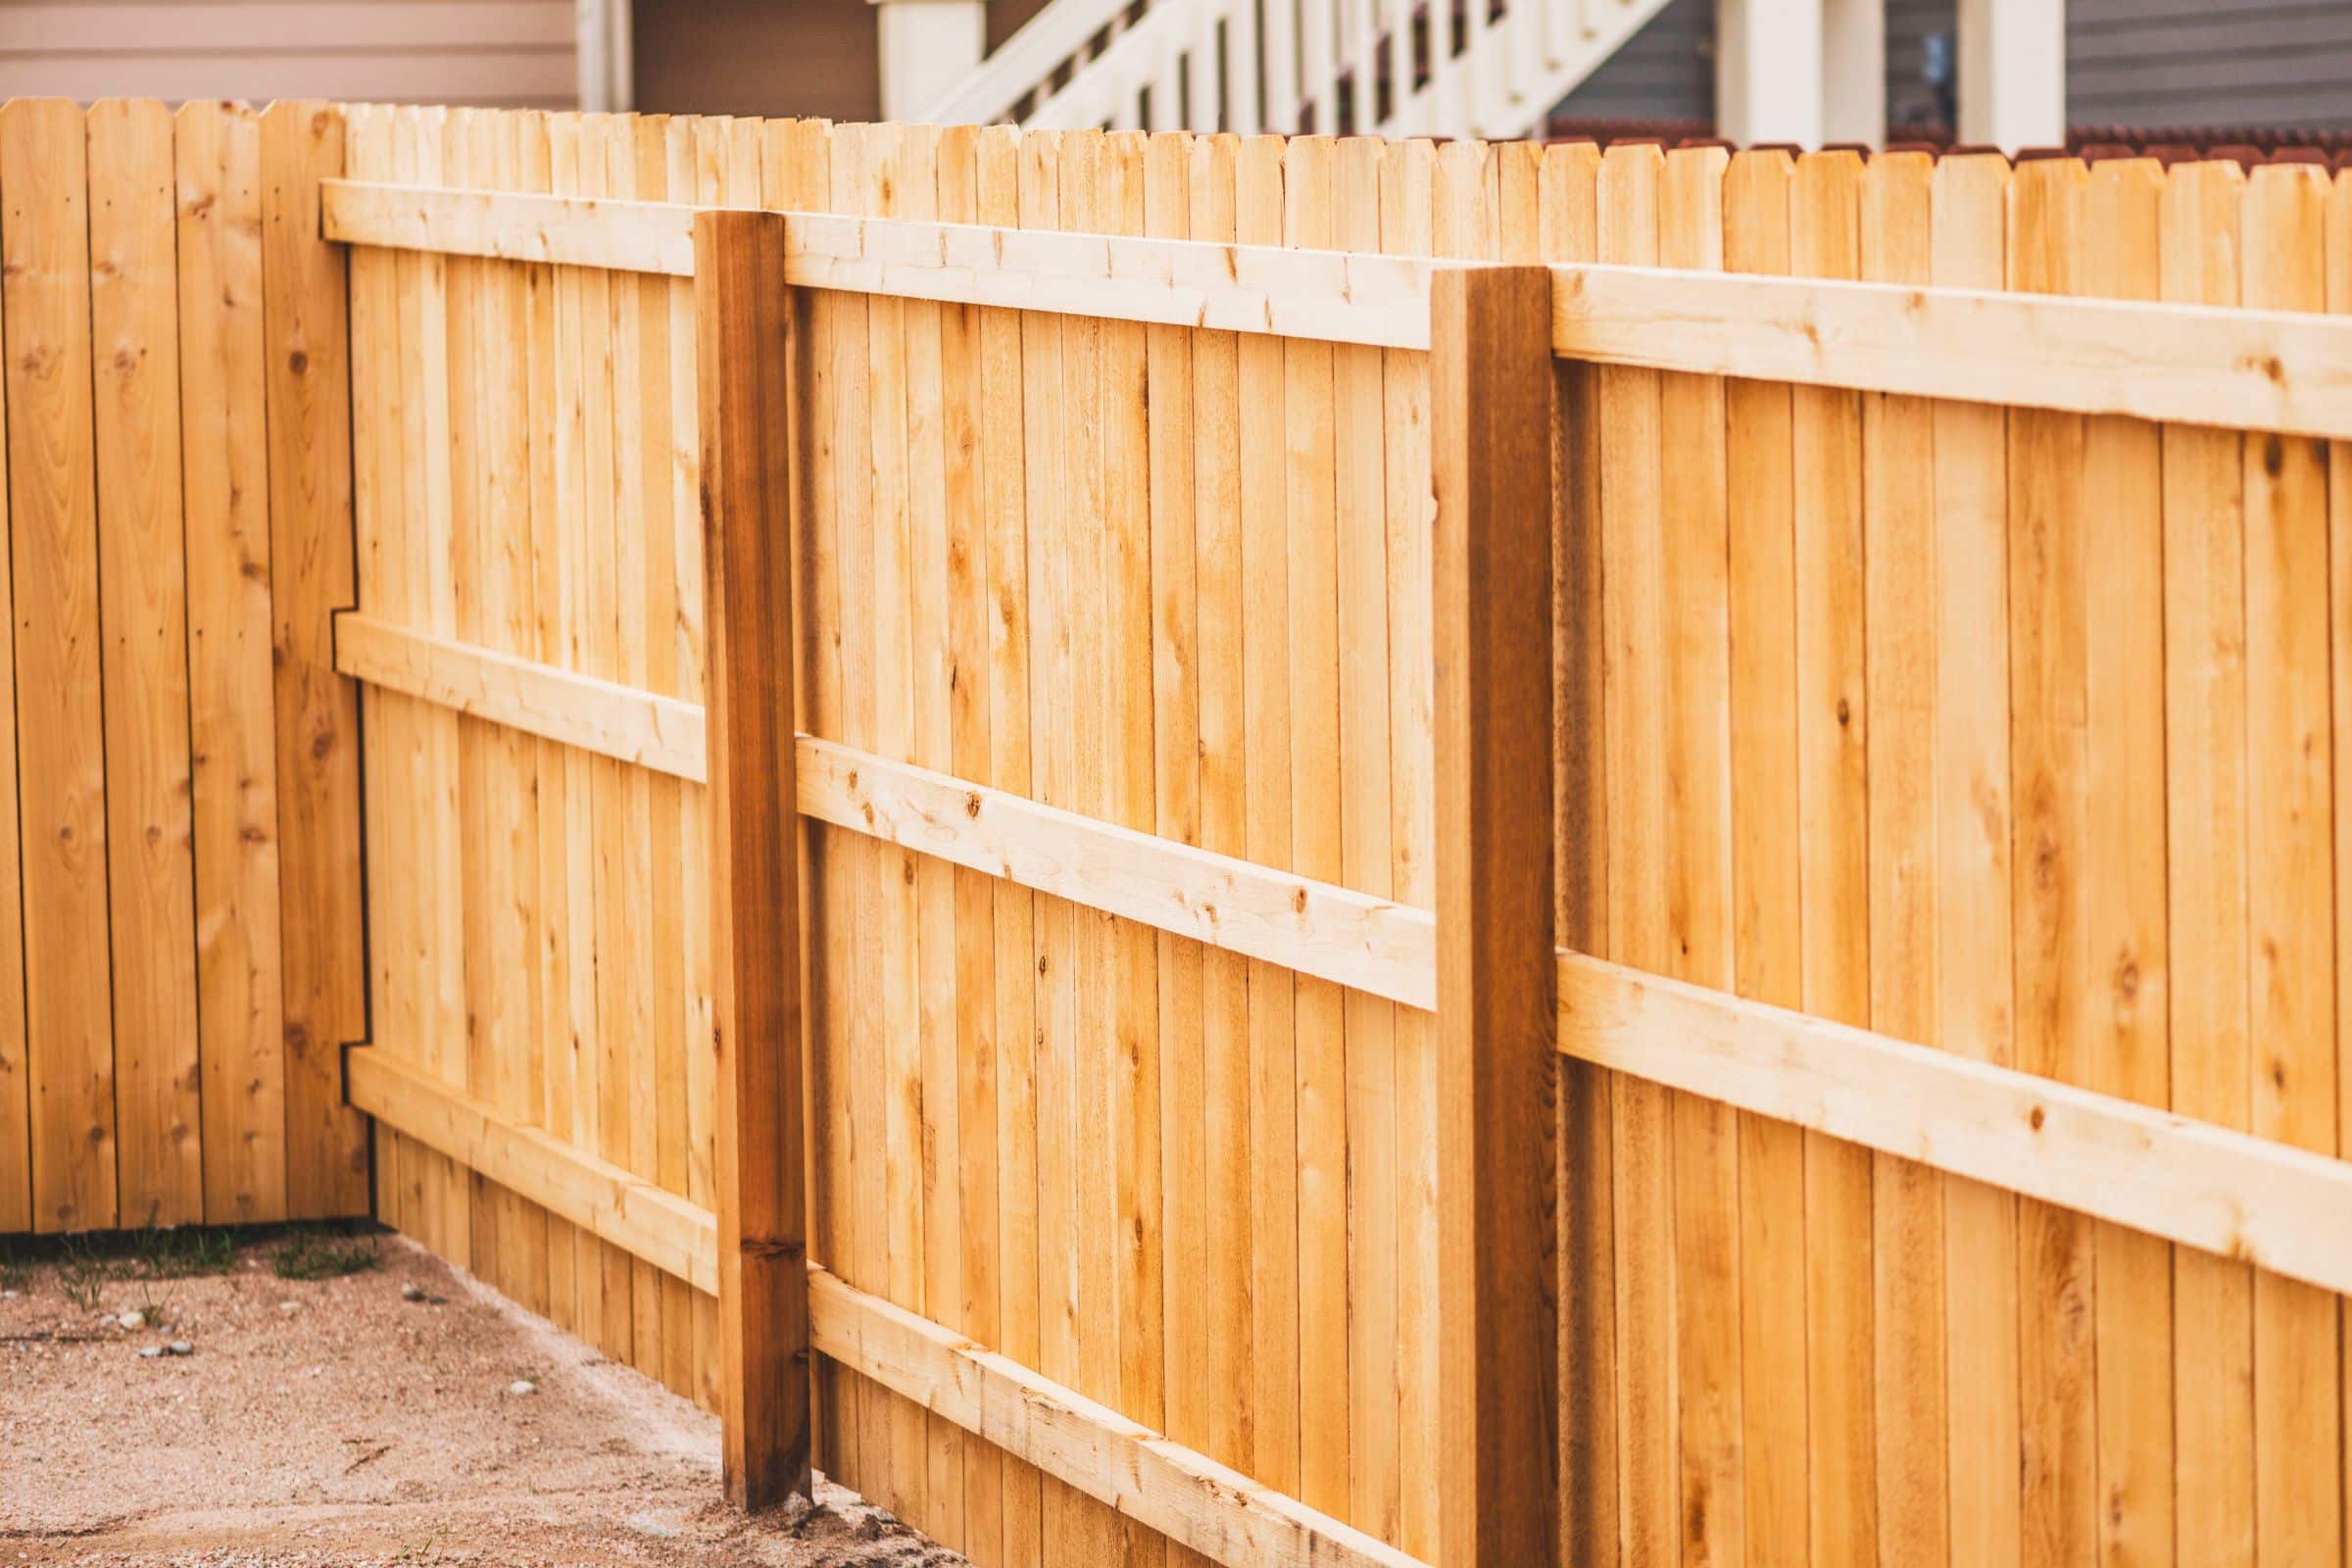 How to Plan for a Seamless Fence Installation: Tips for Preparing Your Property and Budget